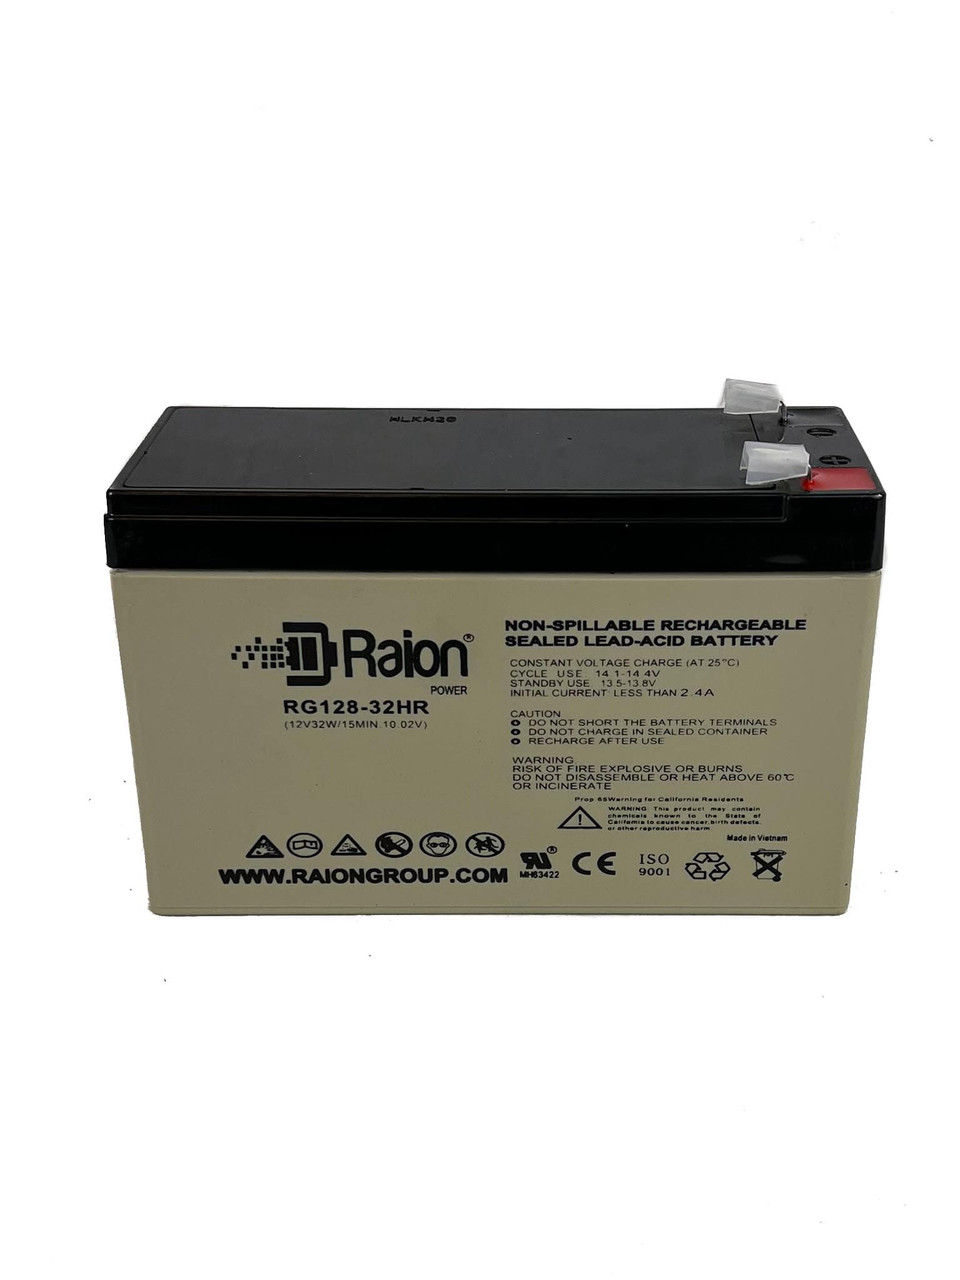 Raion Power 12V 7.5Ah UPS Battery With T2 Terminals For Alpha Technologies ALI Plus 1500 Rack Mount (017-737-20)